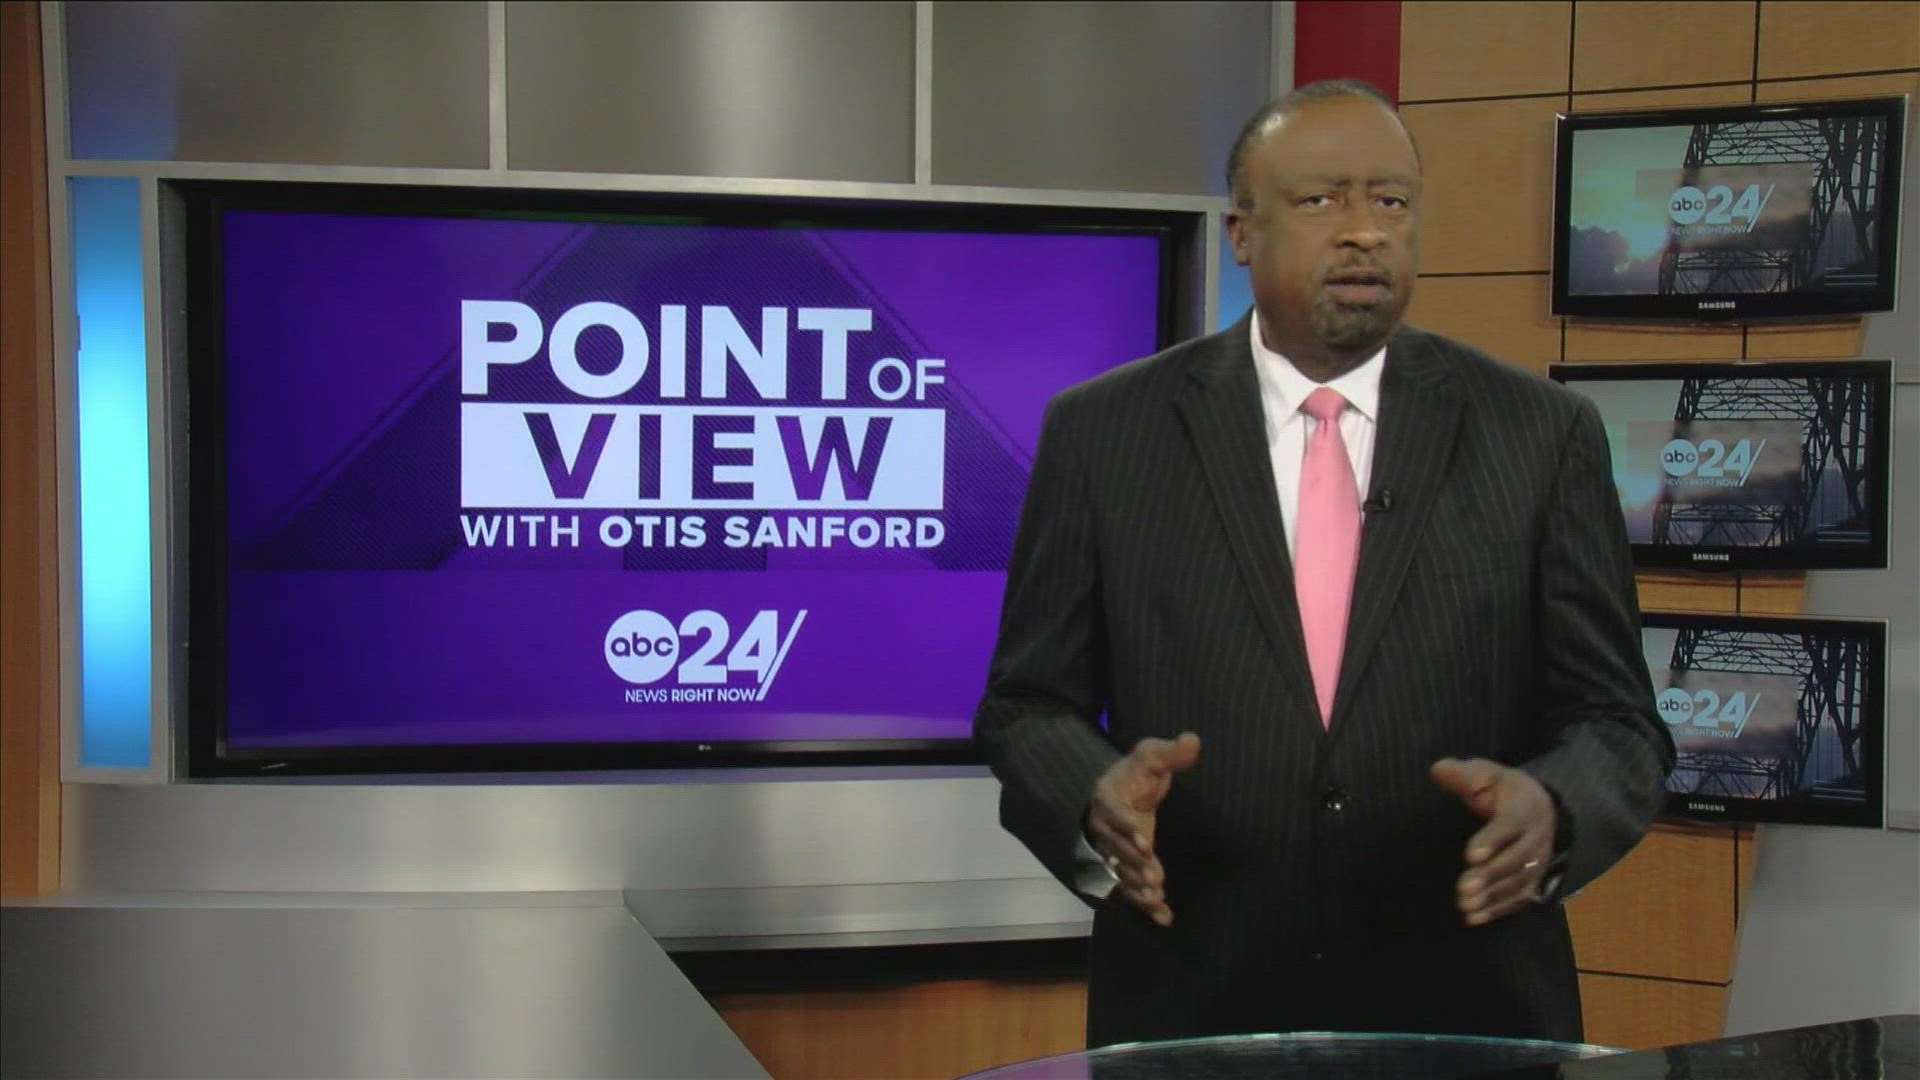 ABC 24 political analyst and commentator Otis Sanford shared his point of view on the latest scandal at the Tennessee capitol.